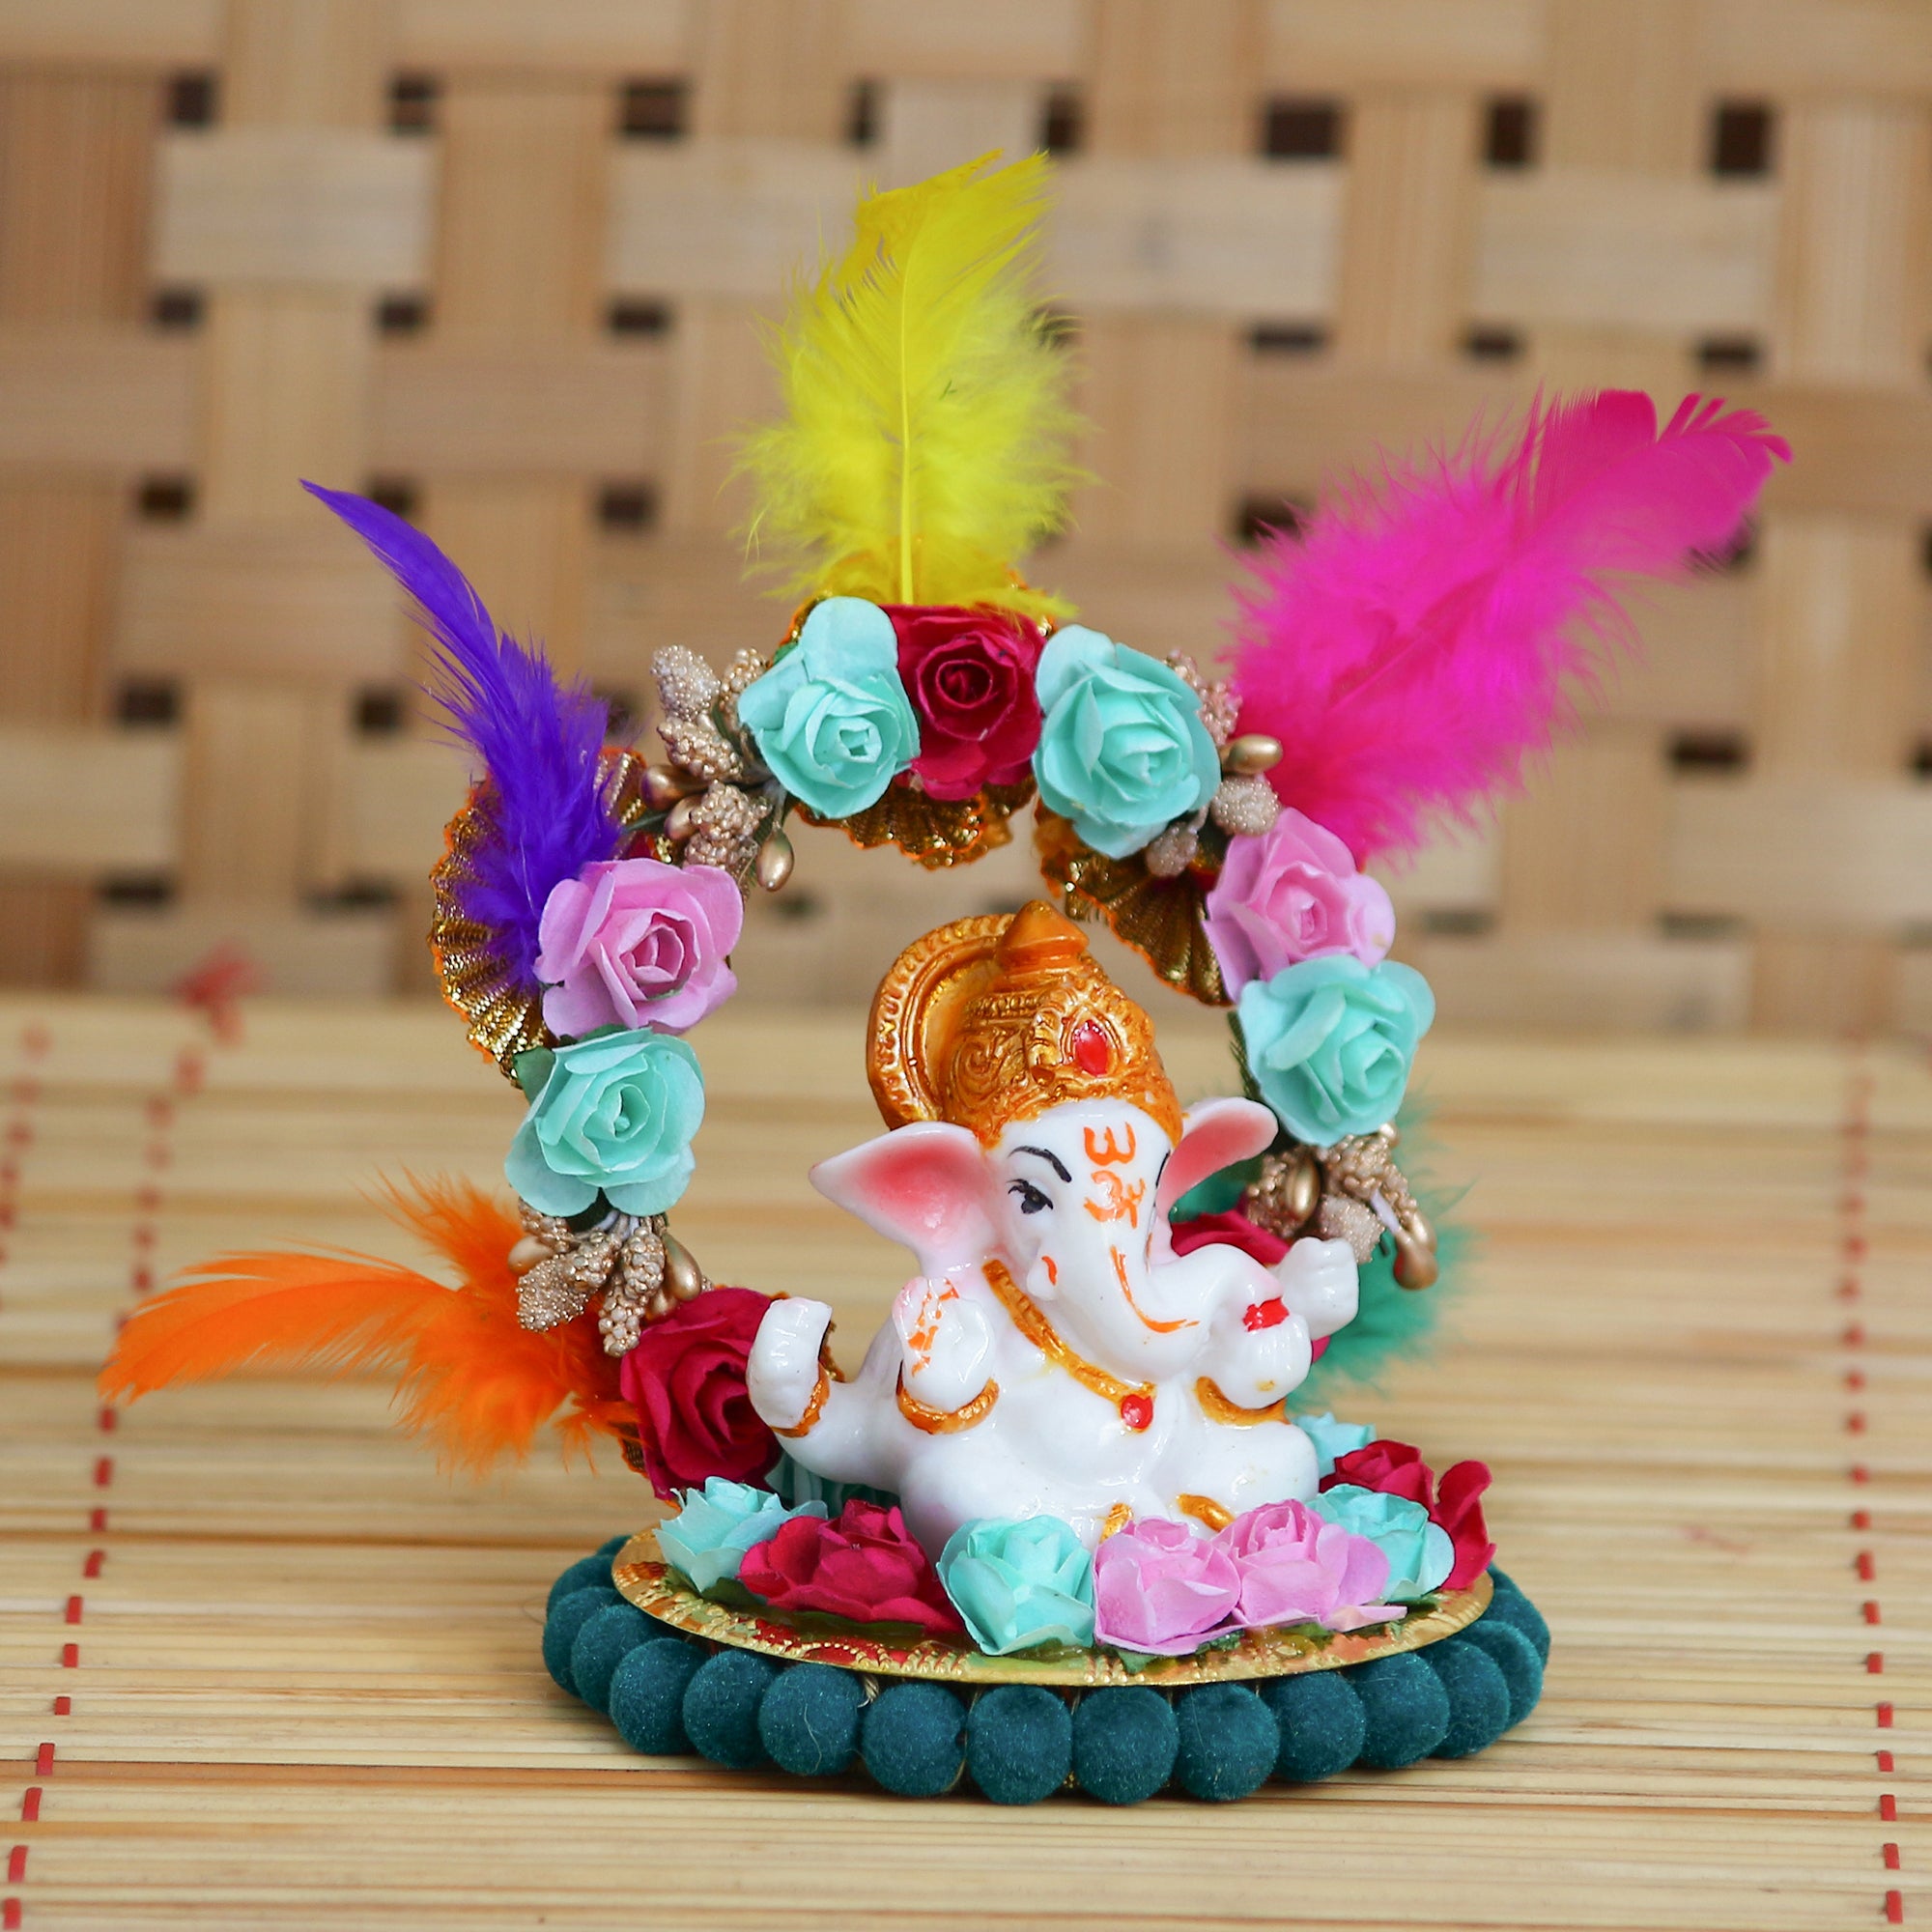 Lord Ganesha Idol On Decorative Handcrafted Plate With Throne Of Colorful Flowers And Feathers 1